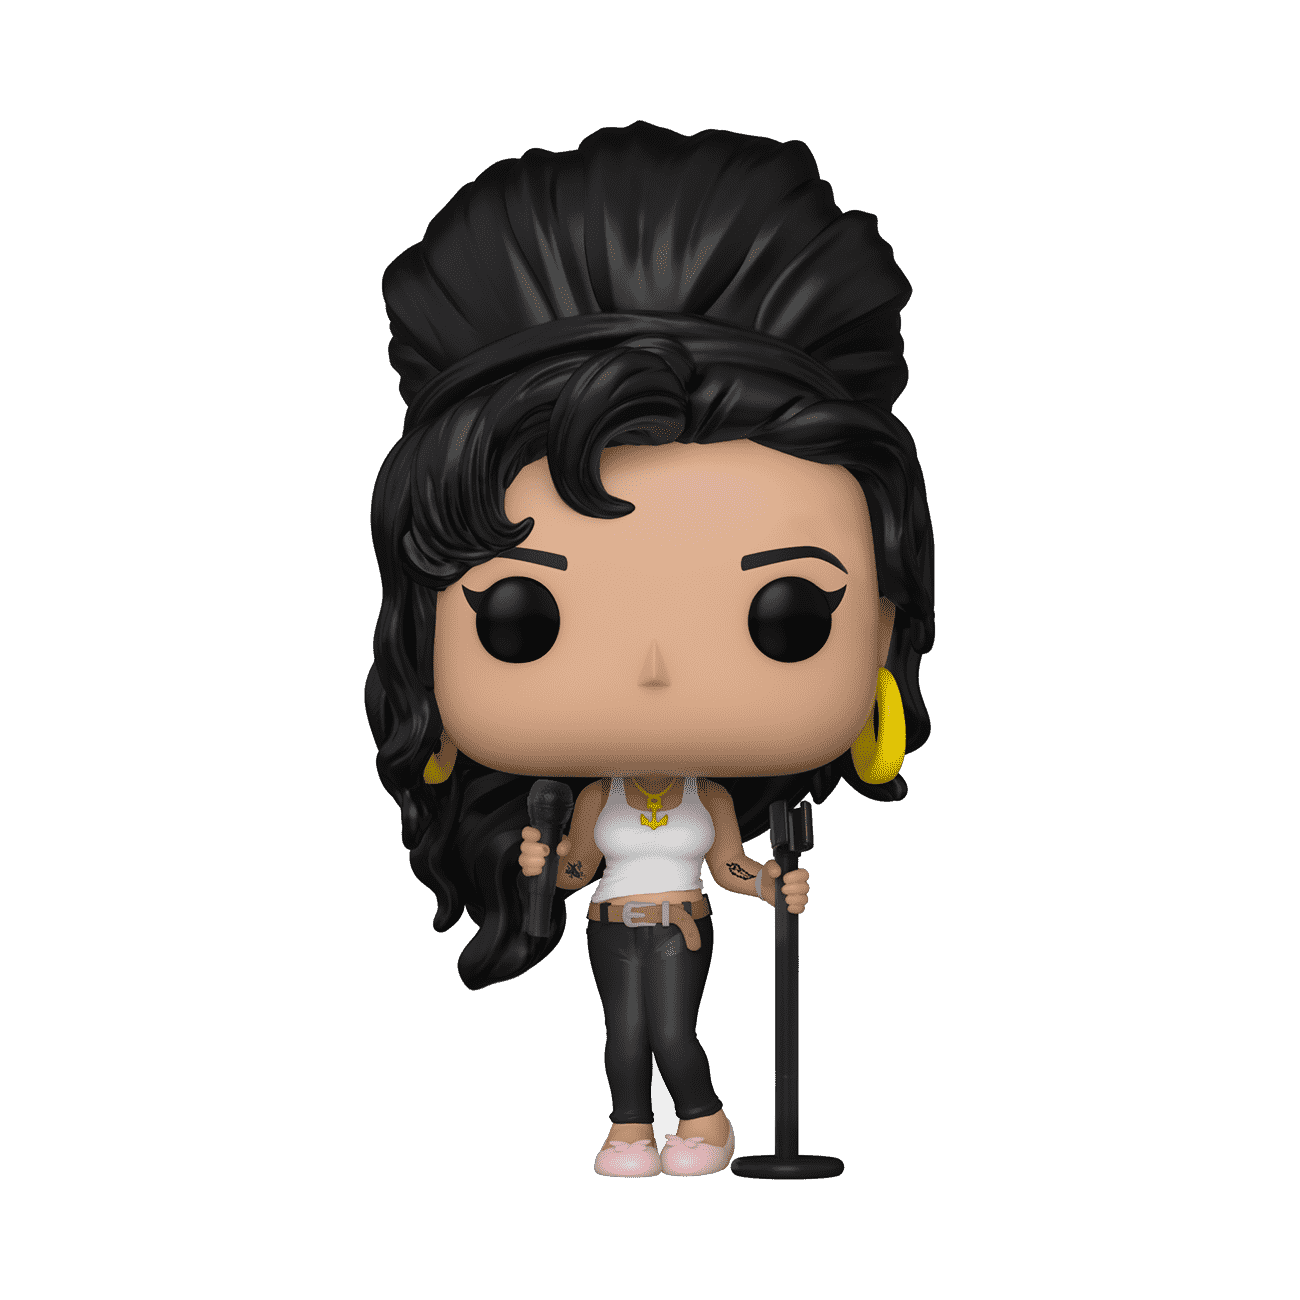 Buy Pop! Amy Winehouse in Tank Top at Funko.